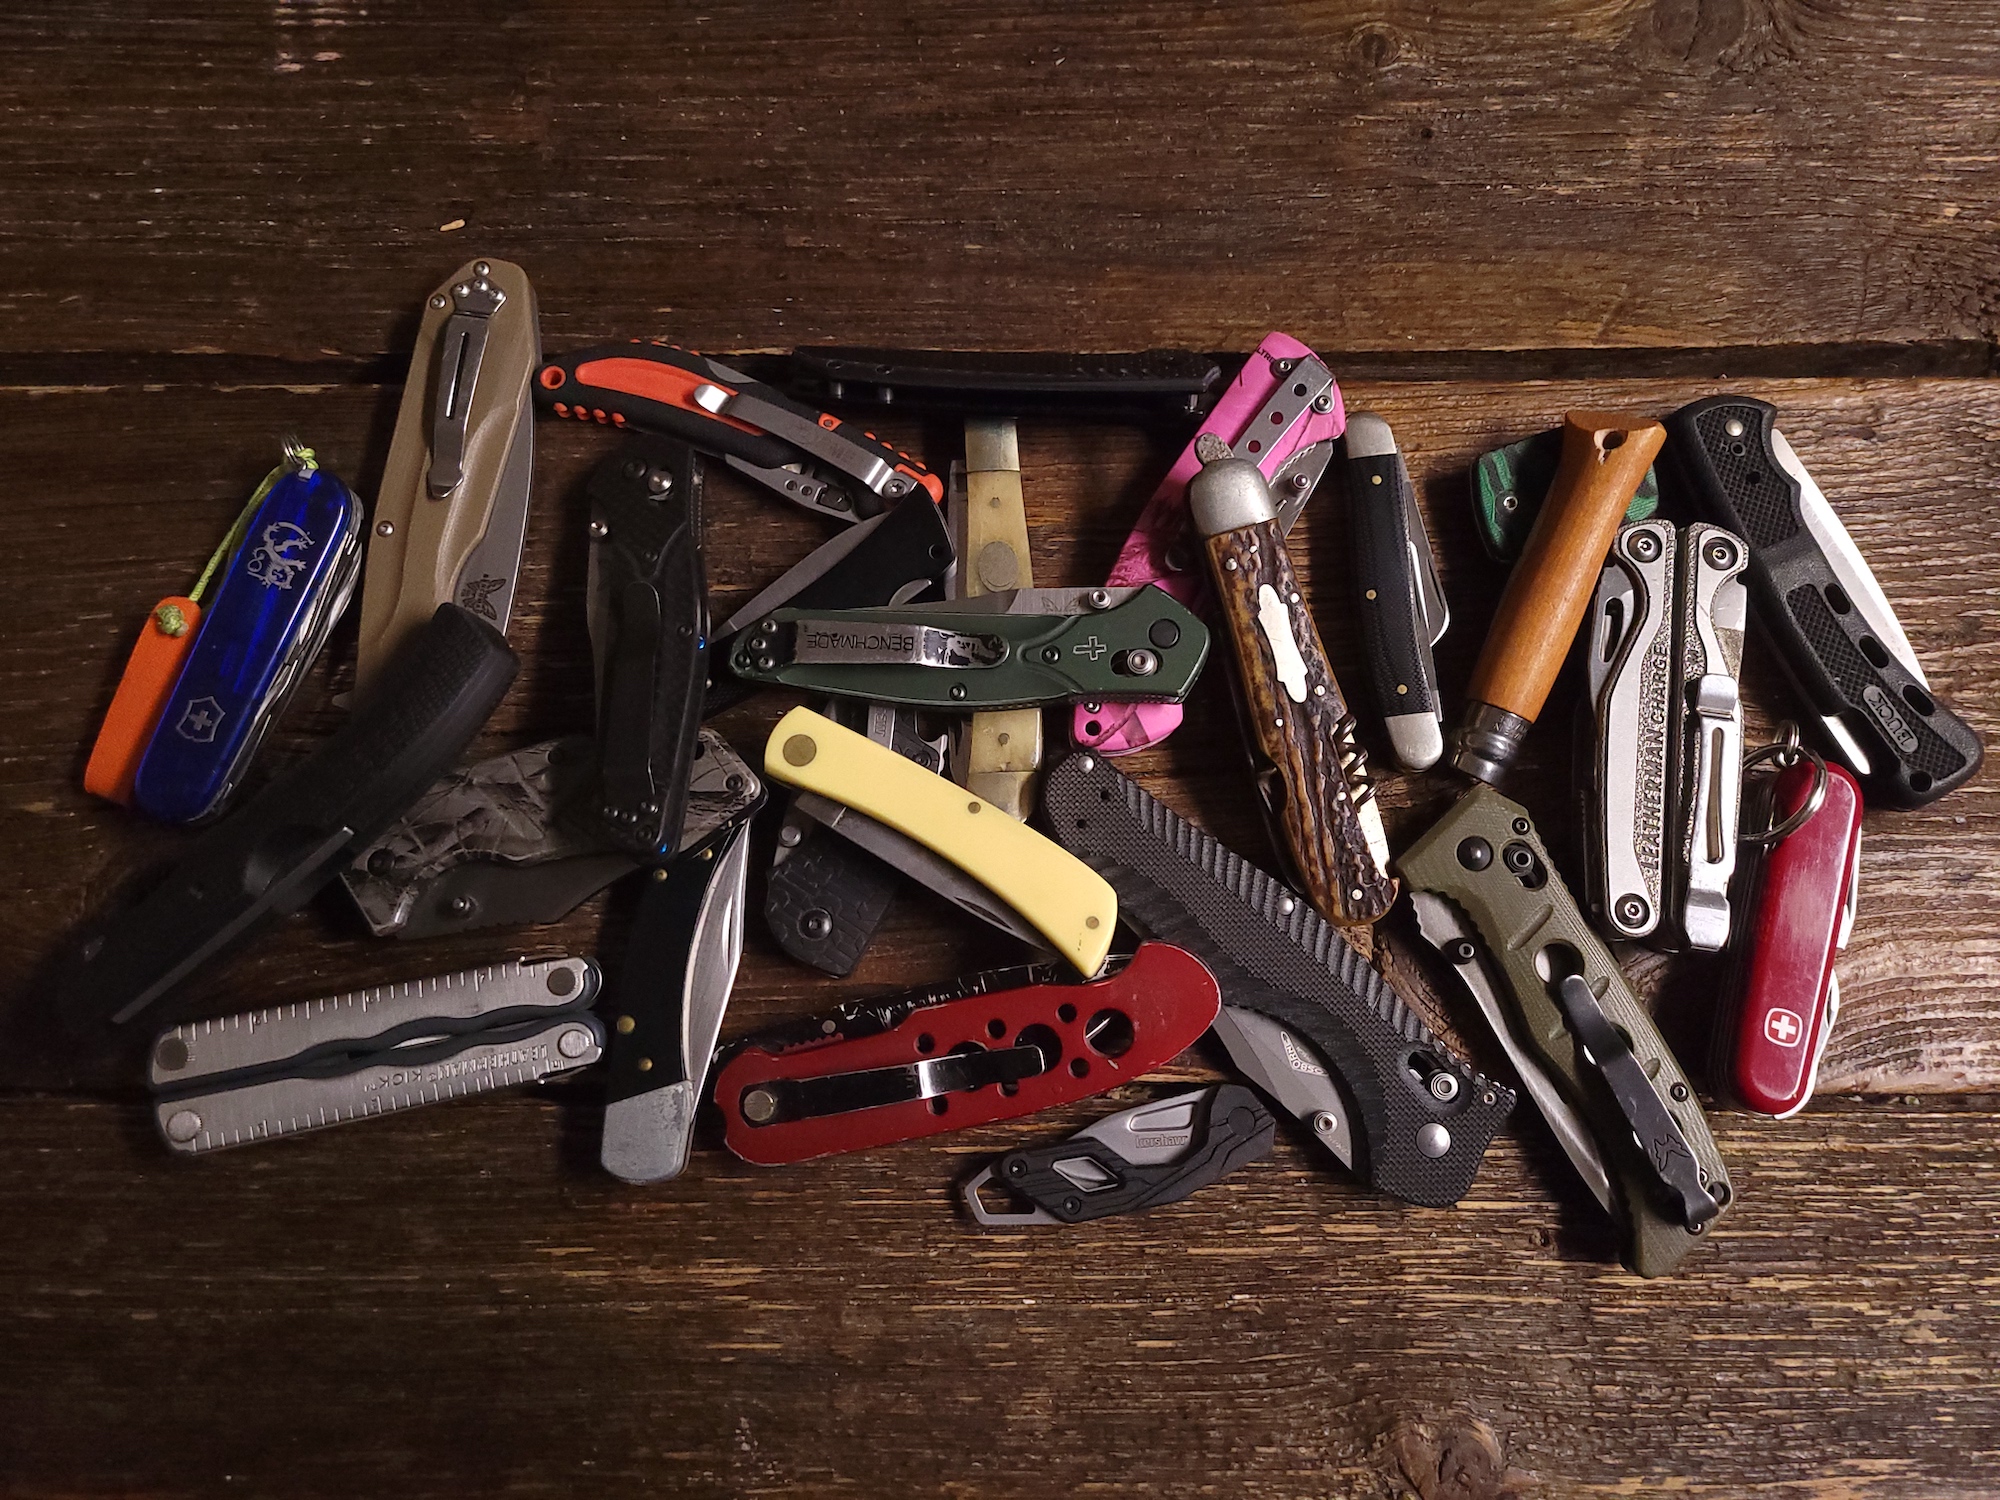 A pile of pocket knives on a wooden surface